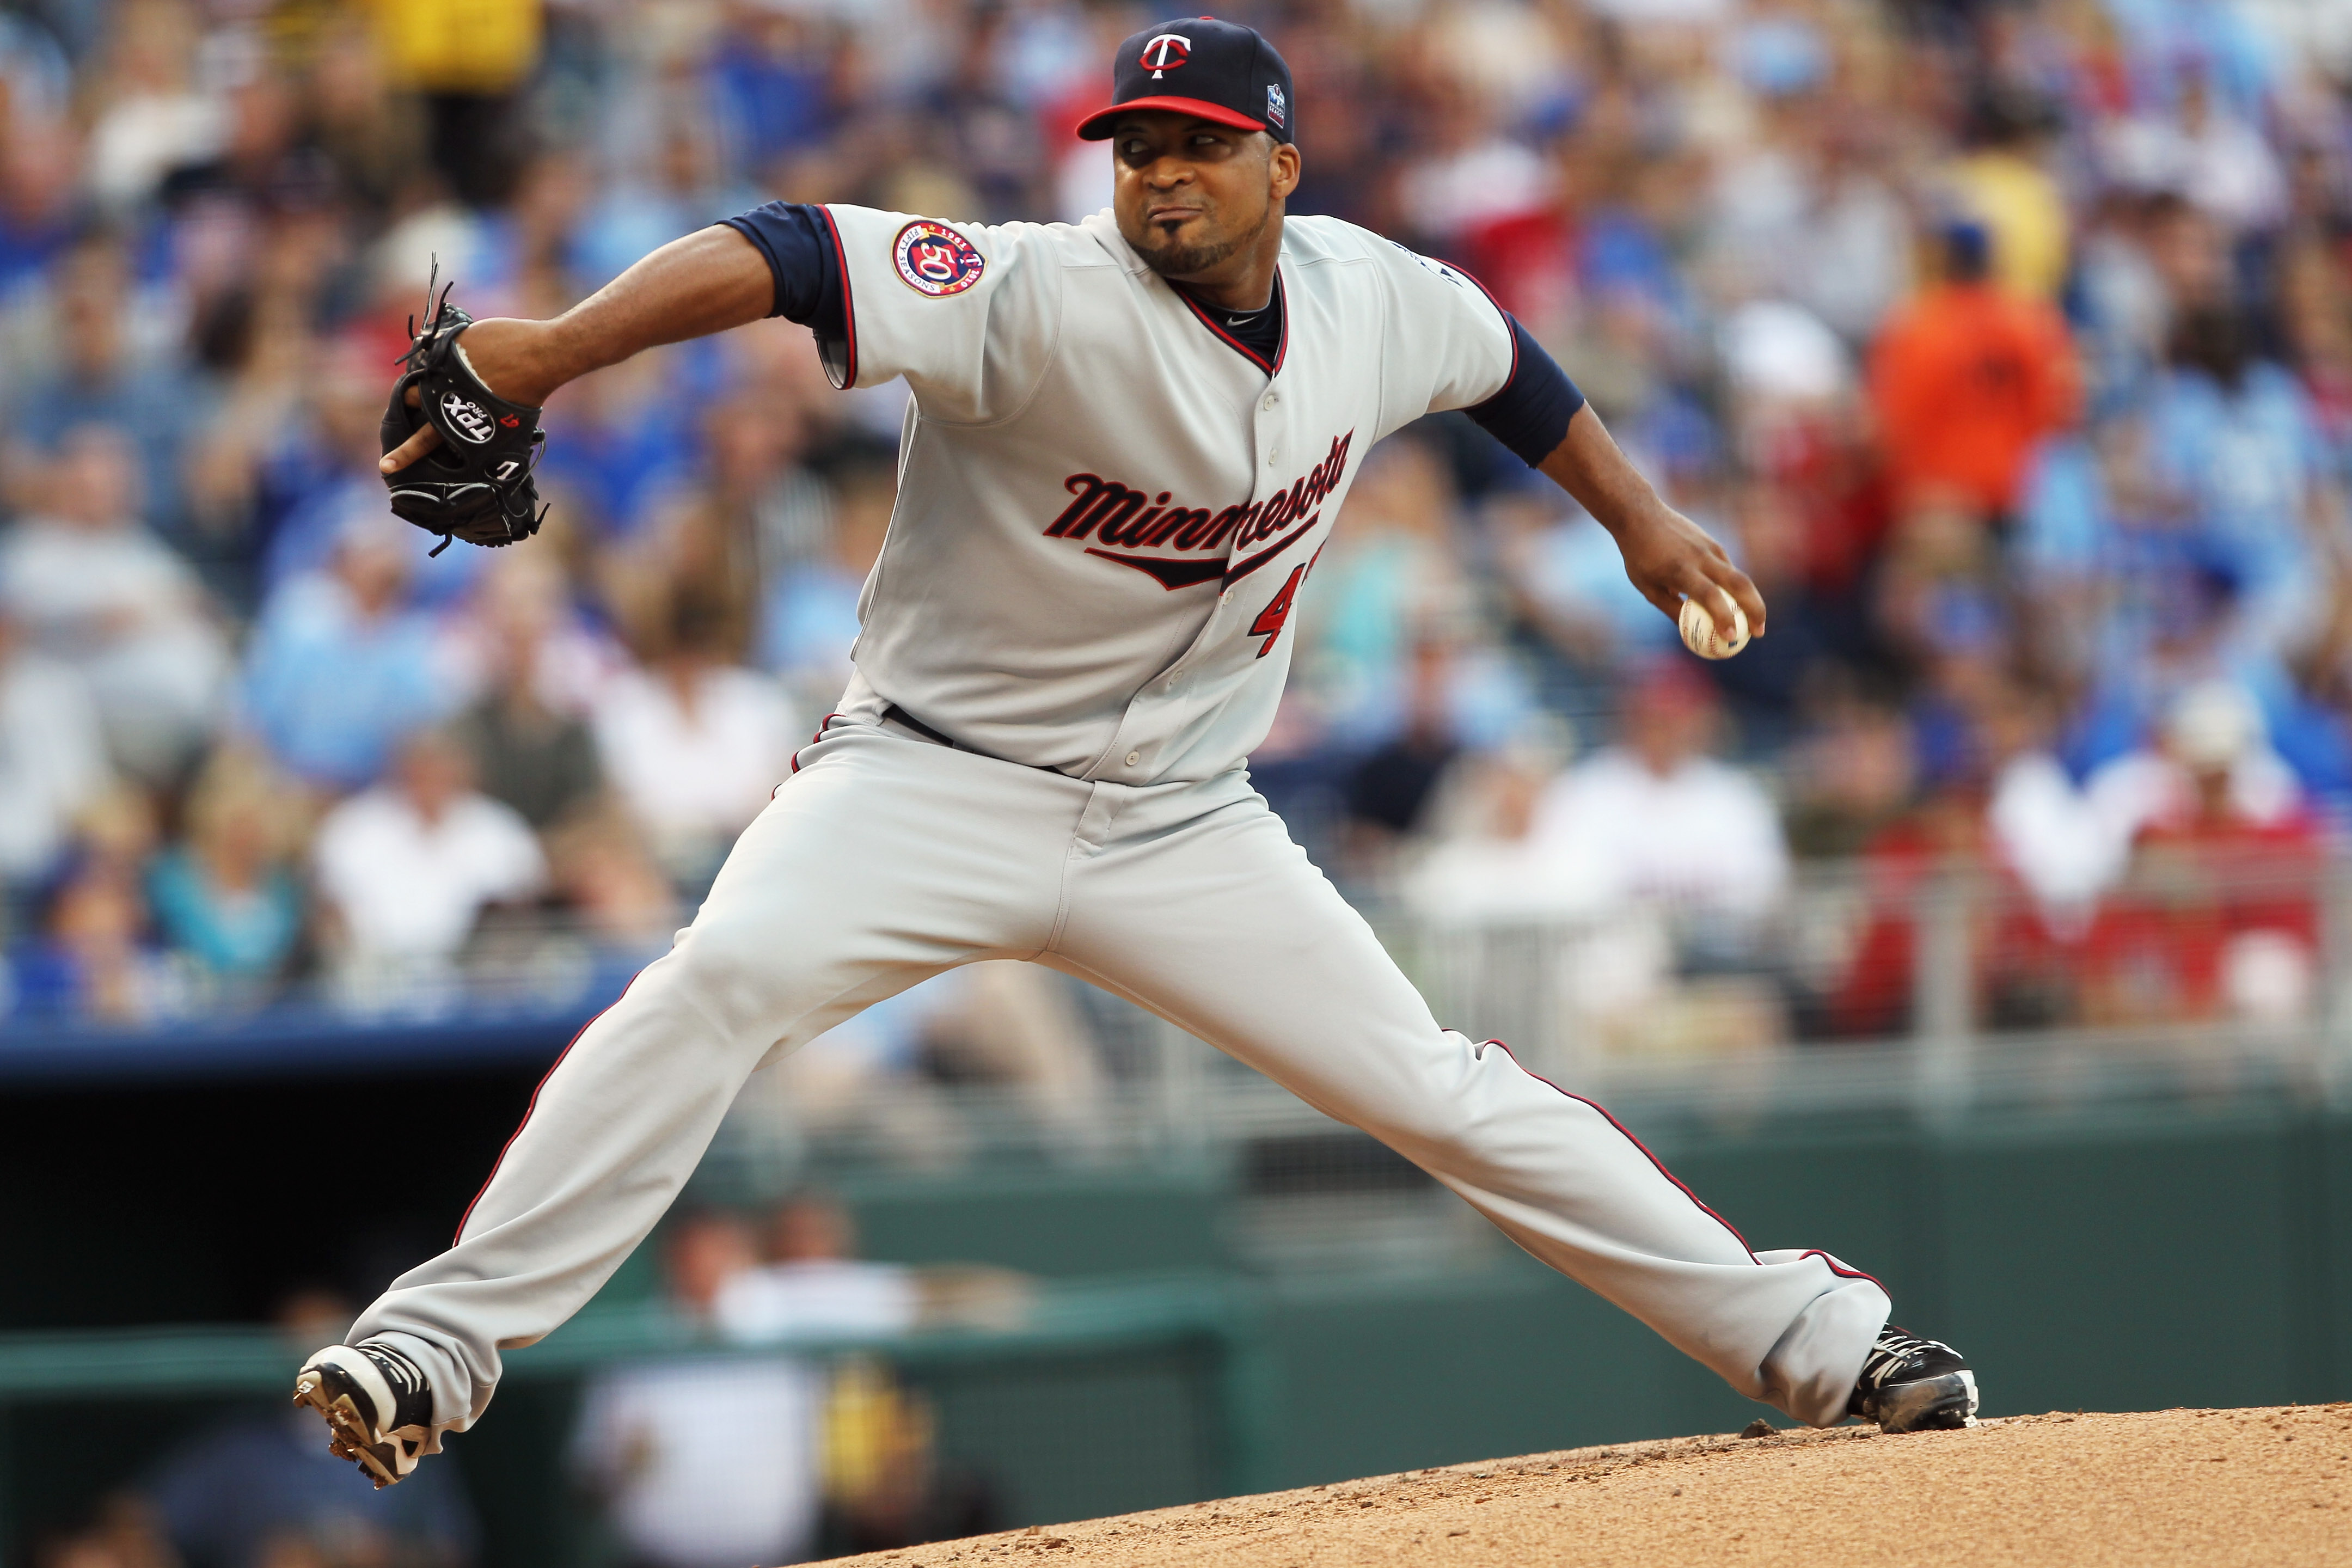 KANSAS CITY, MO - JULY 26:  Starting pitcher Francisco Liriano #47 of the Minnesota Twins pitches during the 1st inning of the game against the Kansas City Royals on July 26, 2010 at Kauffman Stadium in Kansas City, Missouri.  (Photo by Jamie Squire/Getty